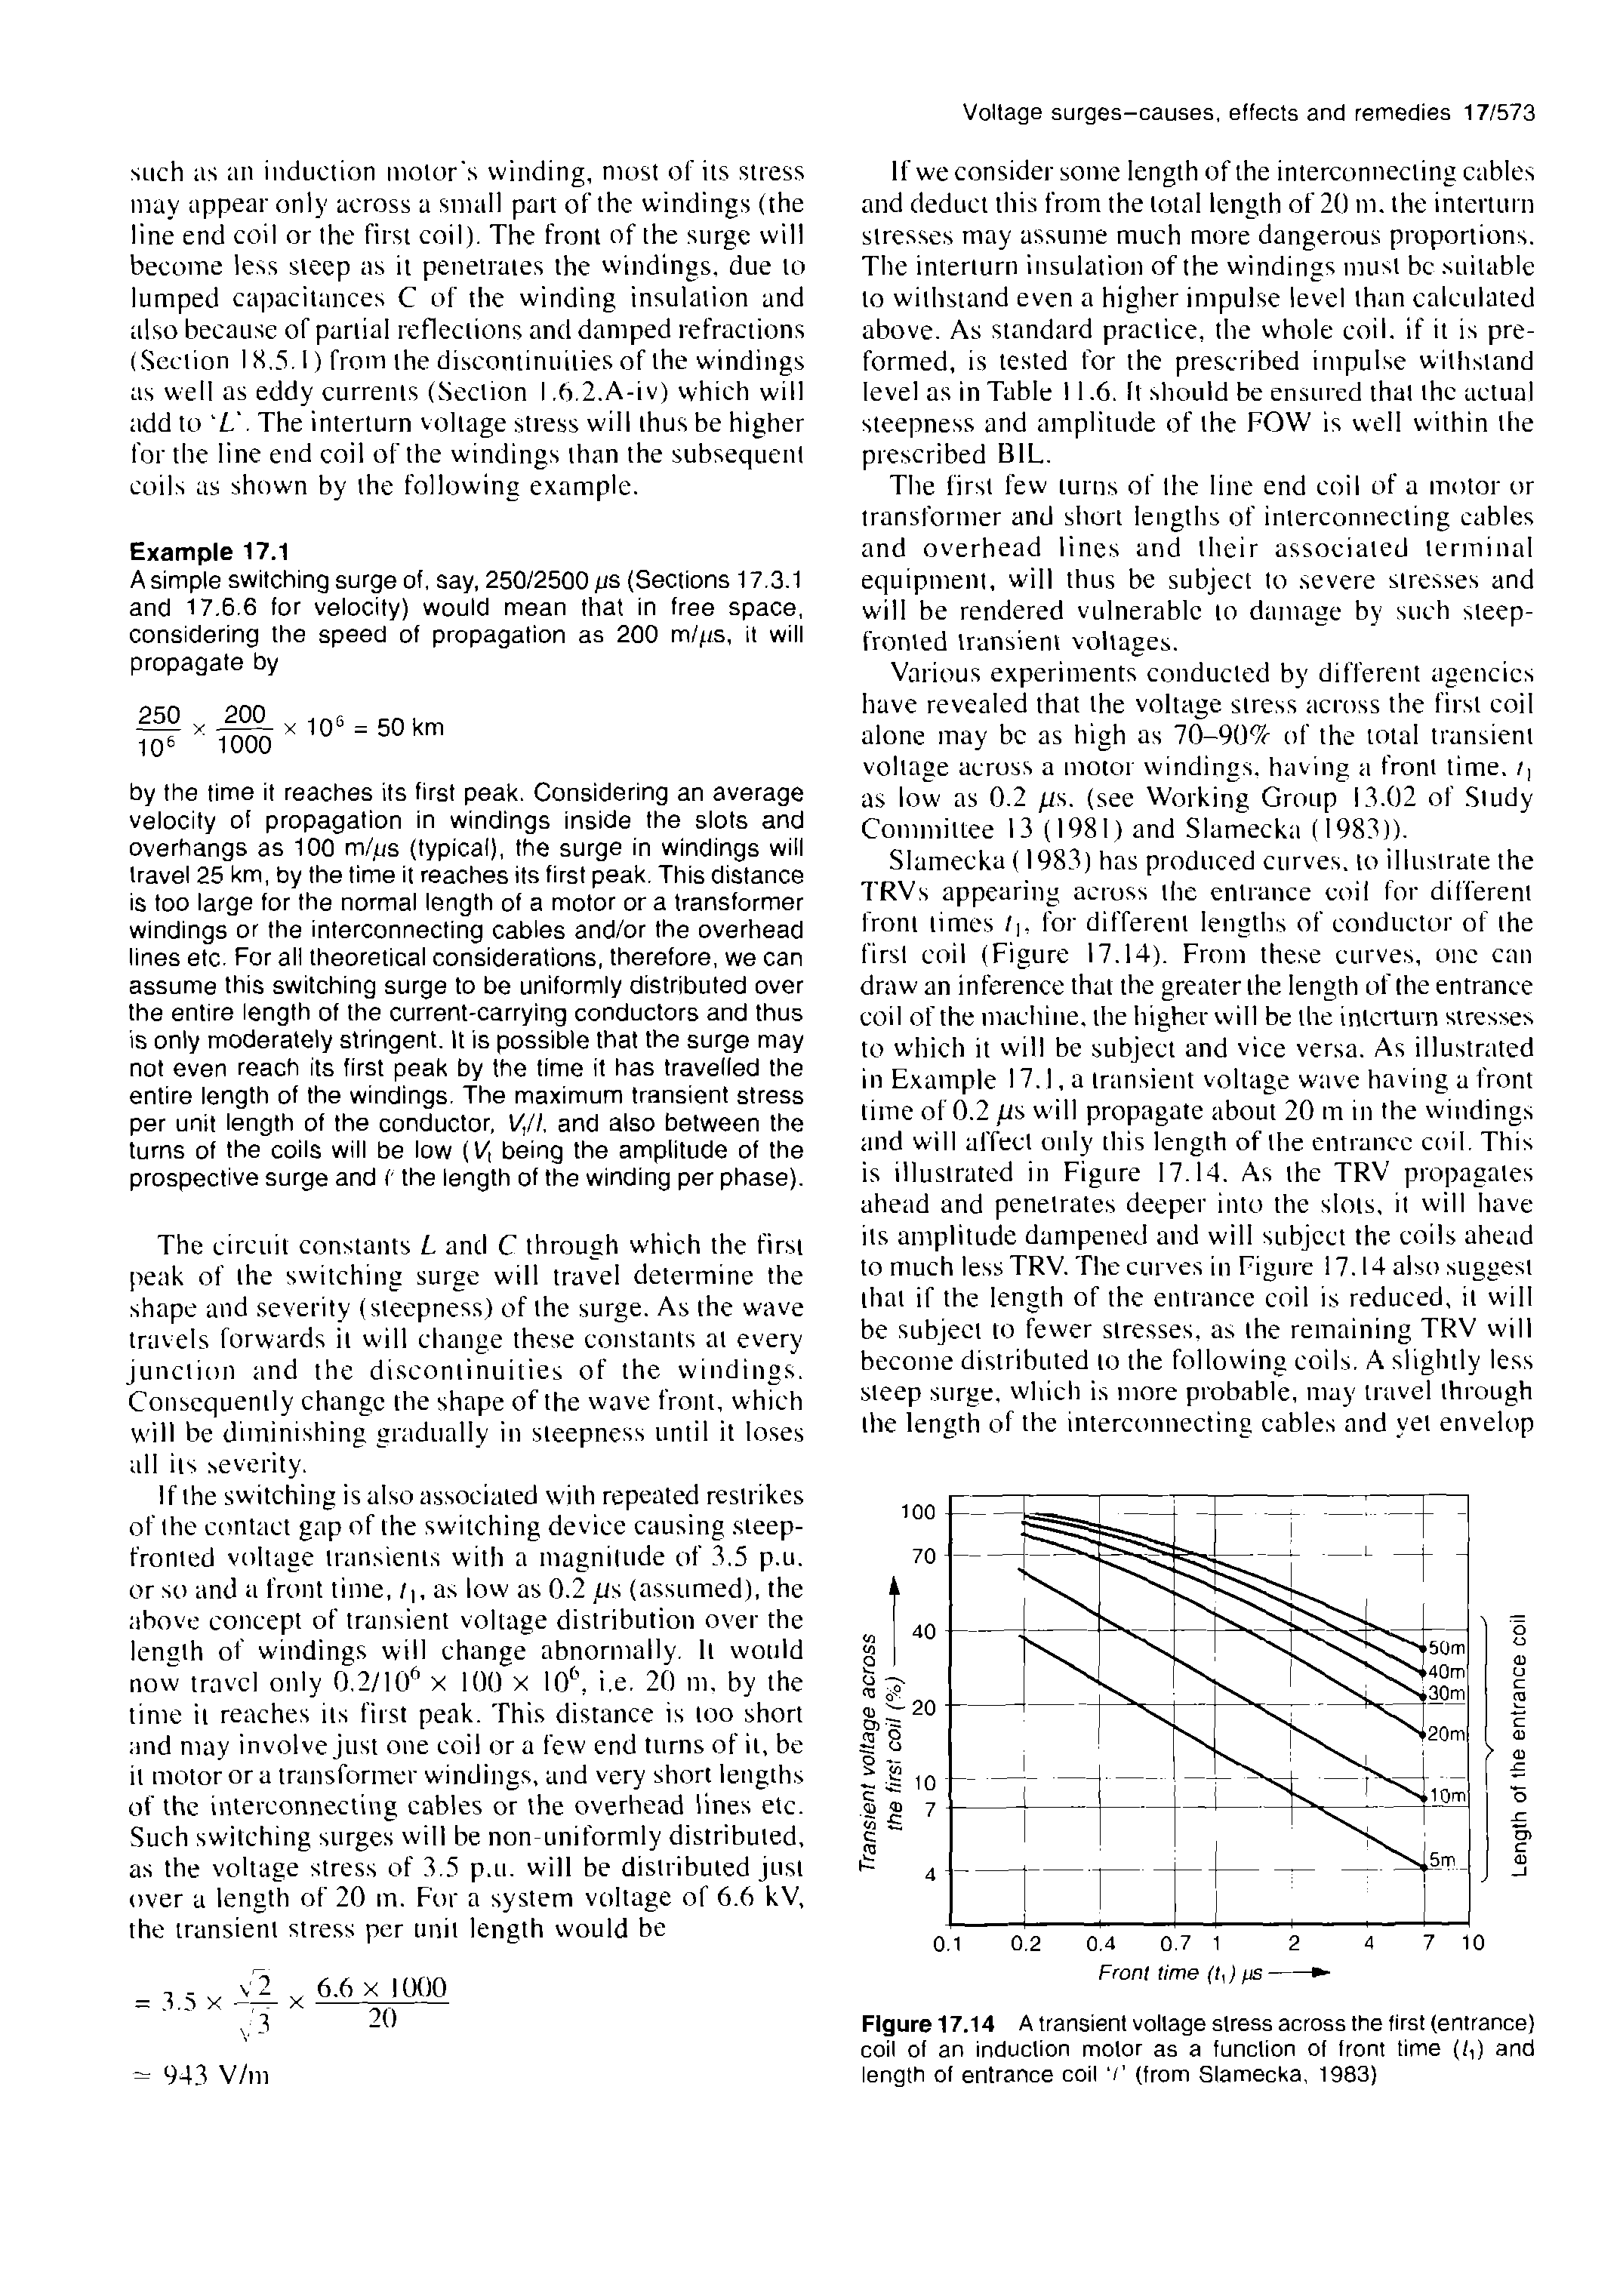 Figure 17.14 A transient voltage stress across the first (entrance) coil of an induction motor as a function of front time (/,) and length of entrance coil (from Slamecka, 1983)...